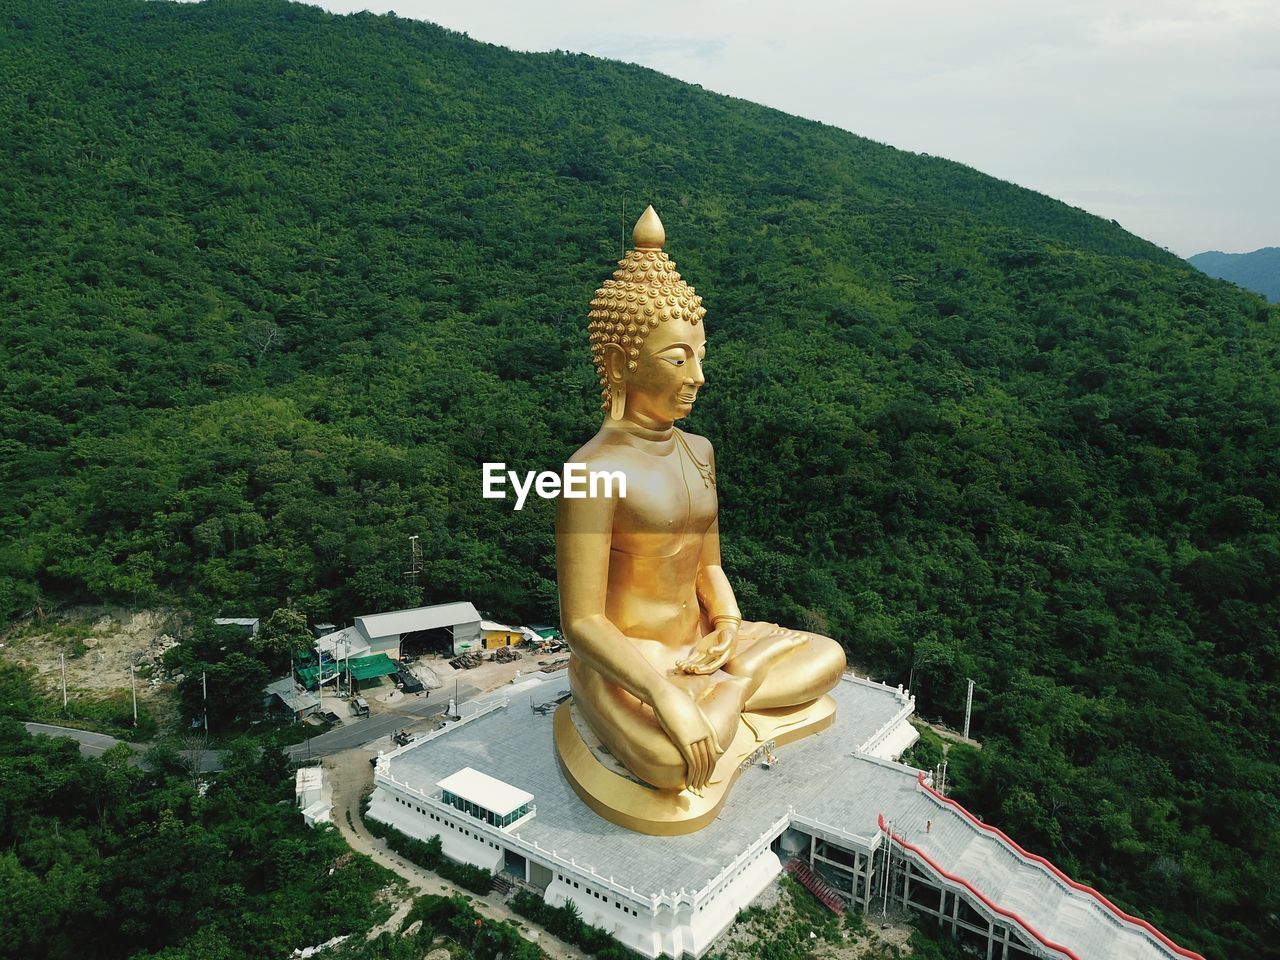 STATUE OF BUDDHA AGAINST TREES